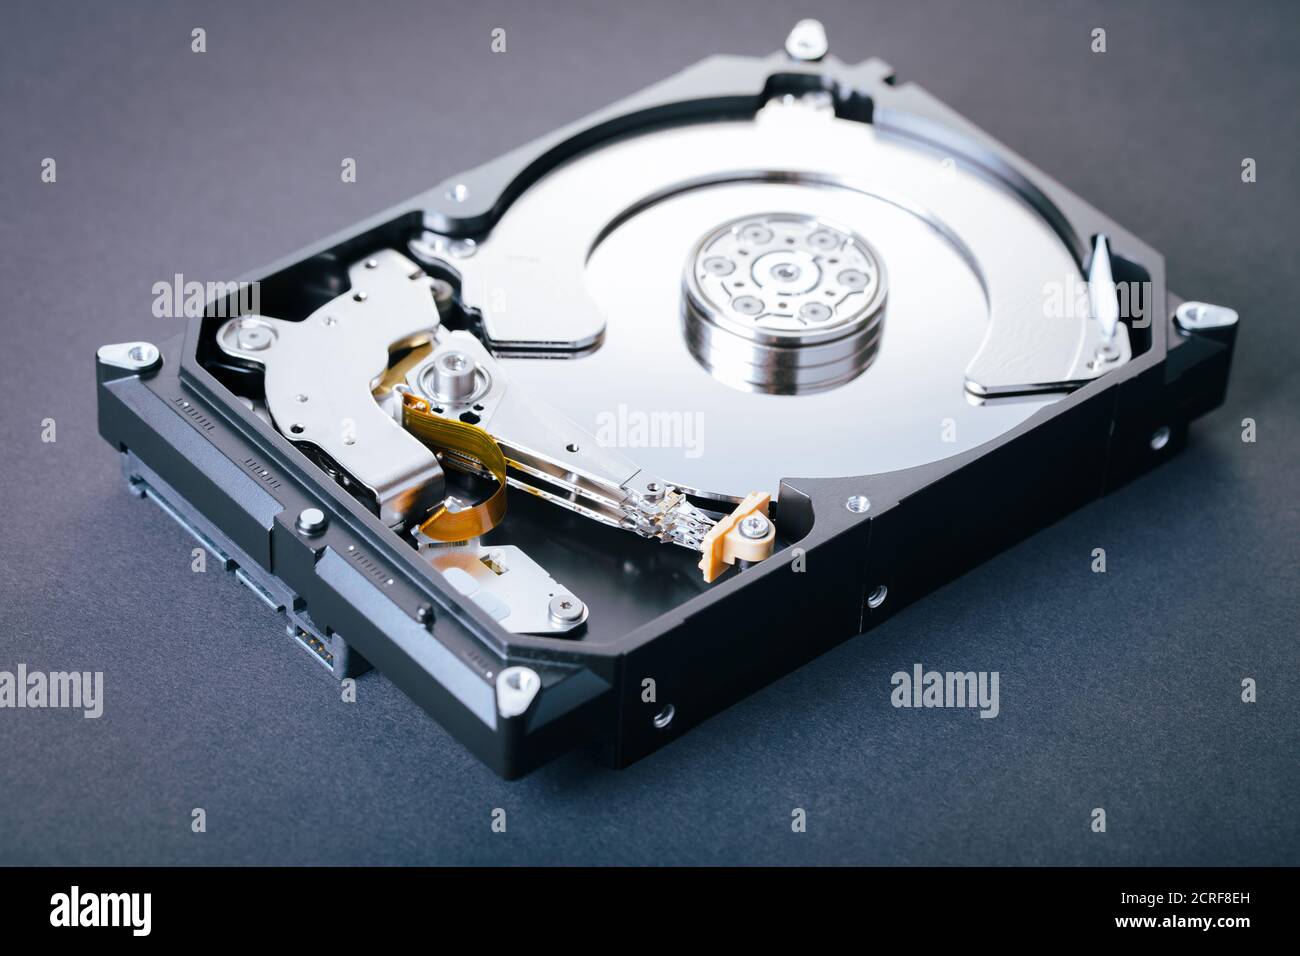 disassembled computer hard drive on black background Stock Photo